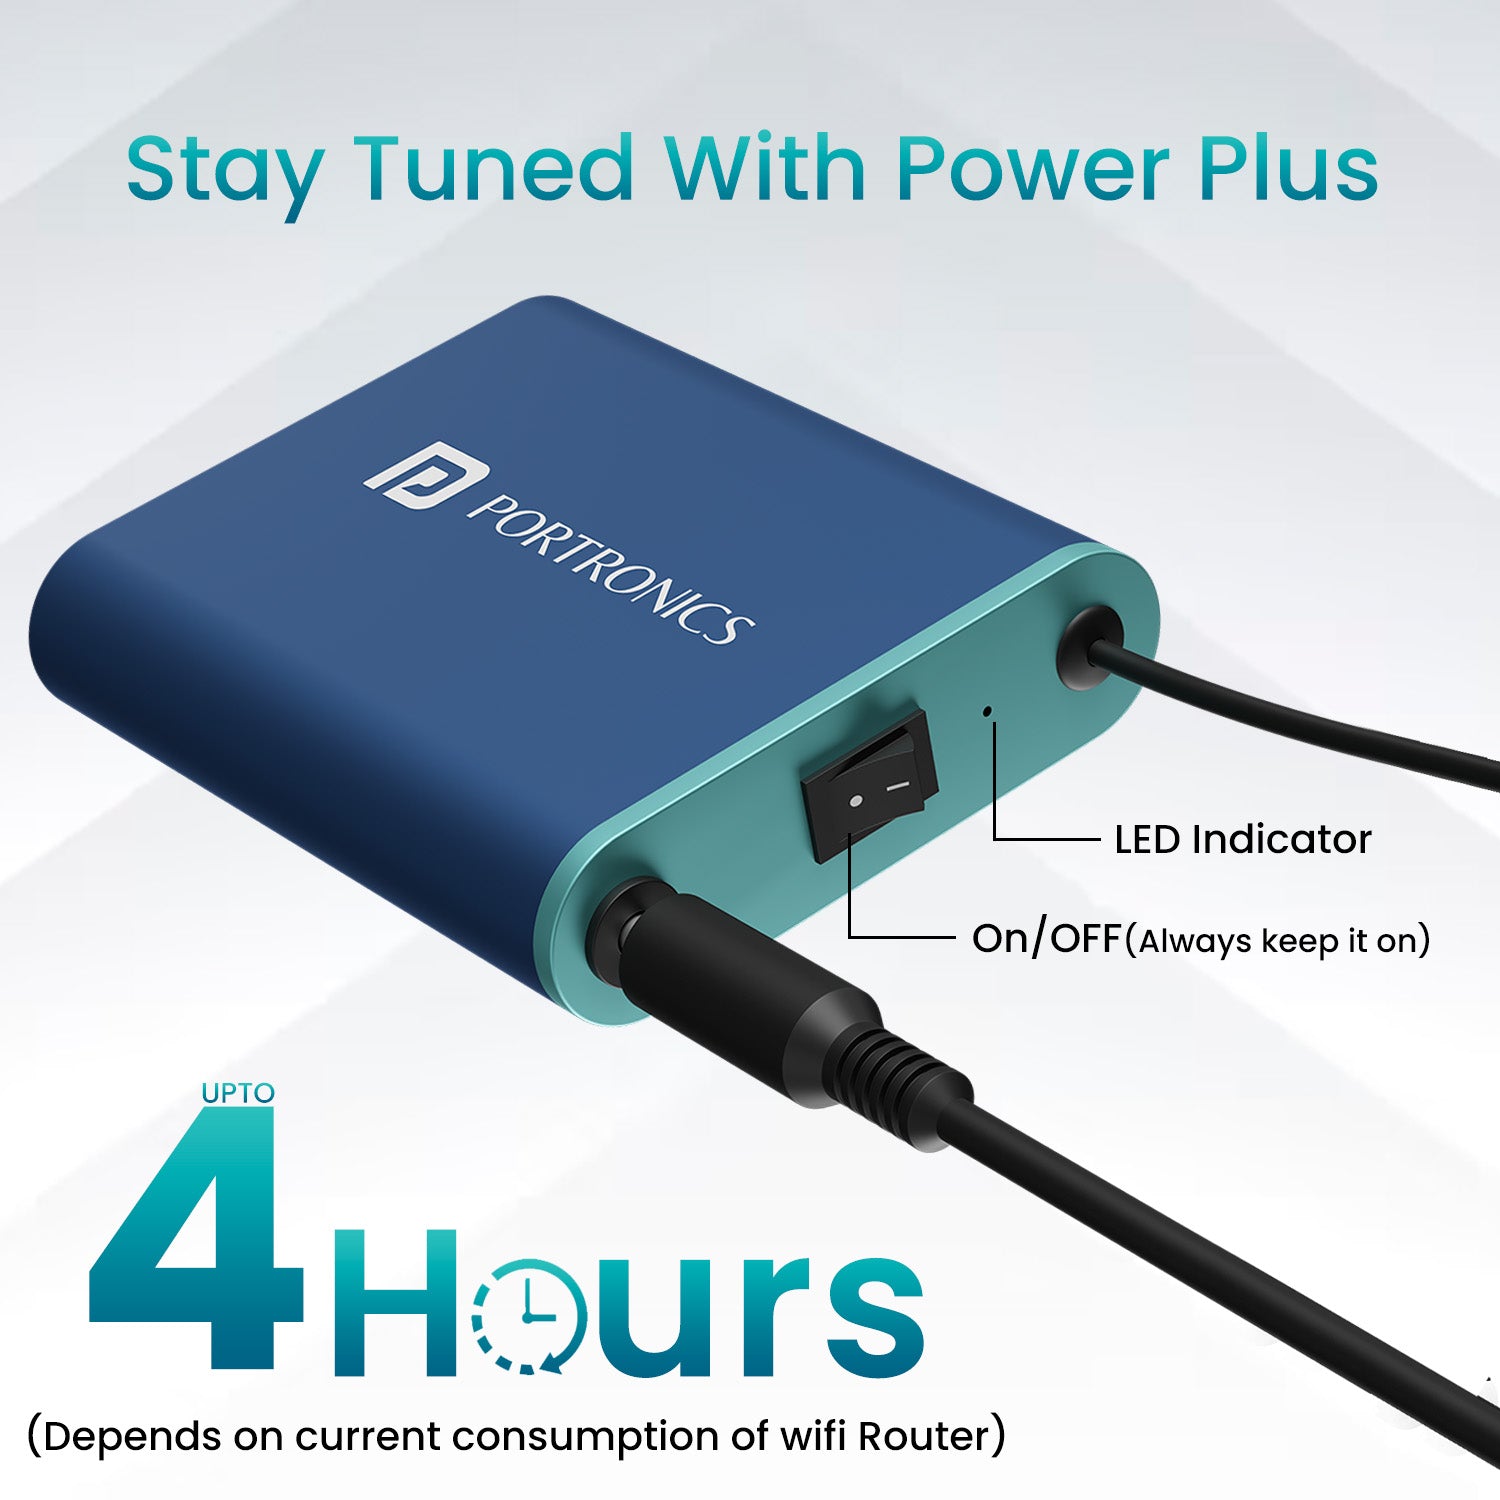 Portronics POWER PLUS 2000mah extended power bank| mini power bank has 4hr of power backup with LED indicator. Blue